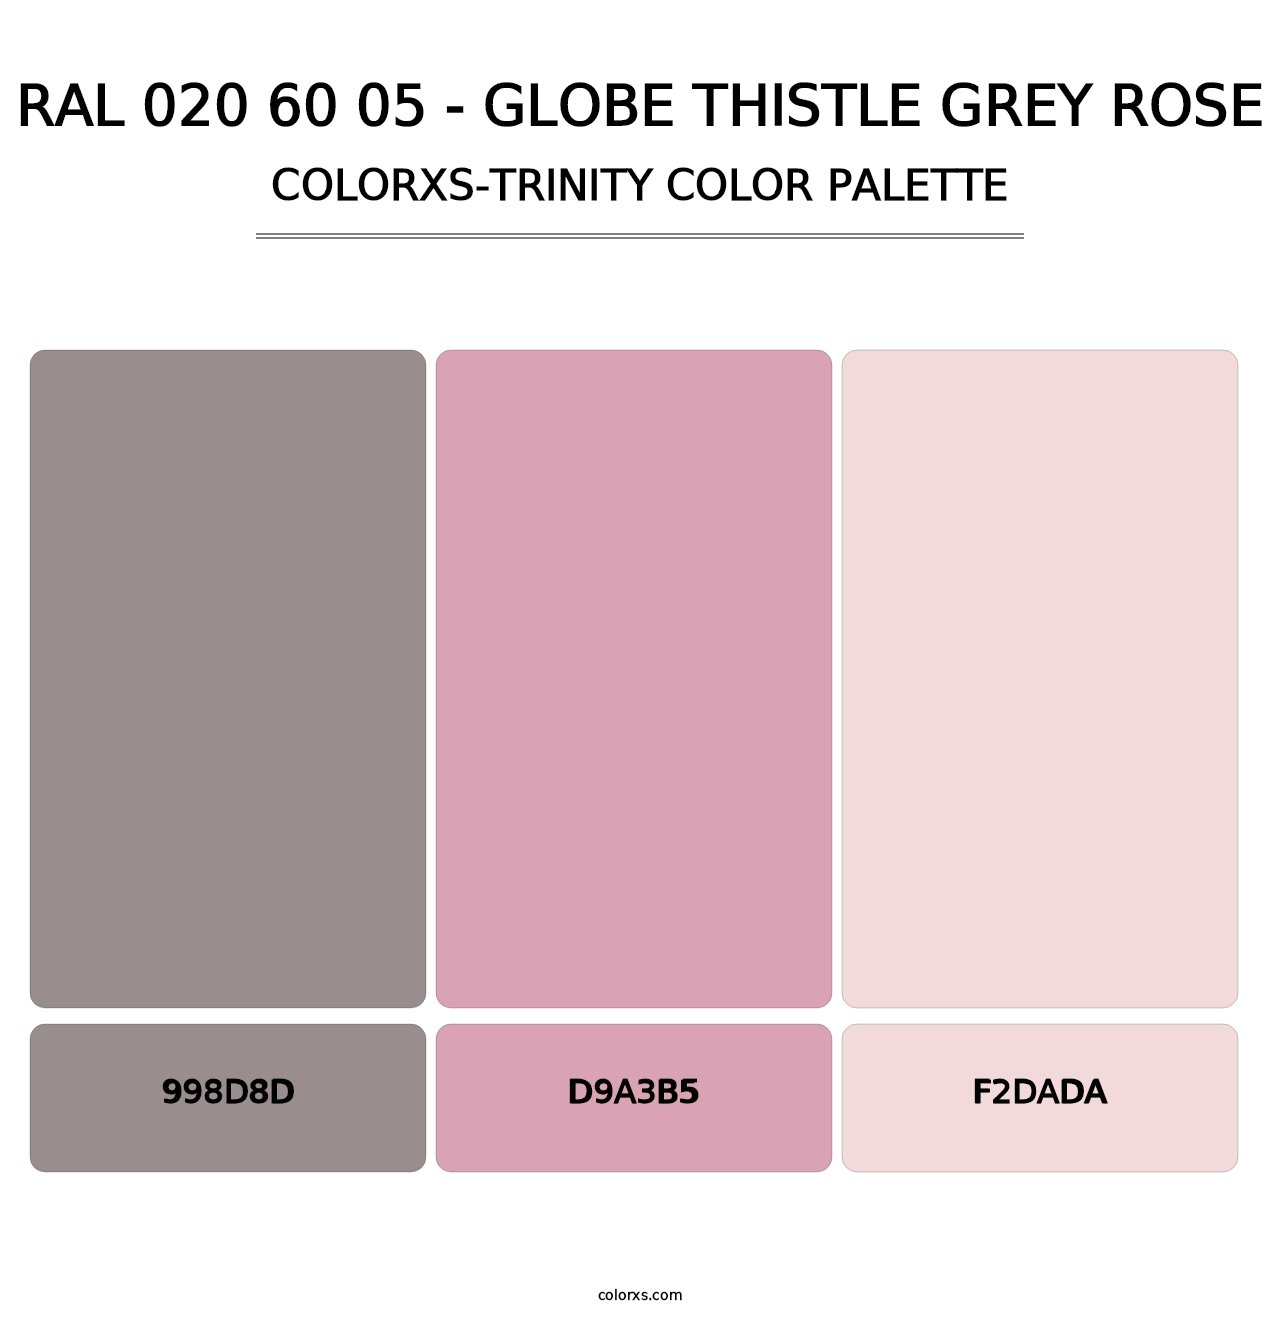 RAL 020 60 05 - Globe Thistle Grey Rose - Colorxs Trinity Palette